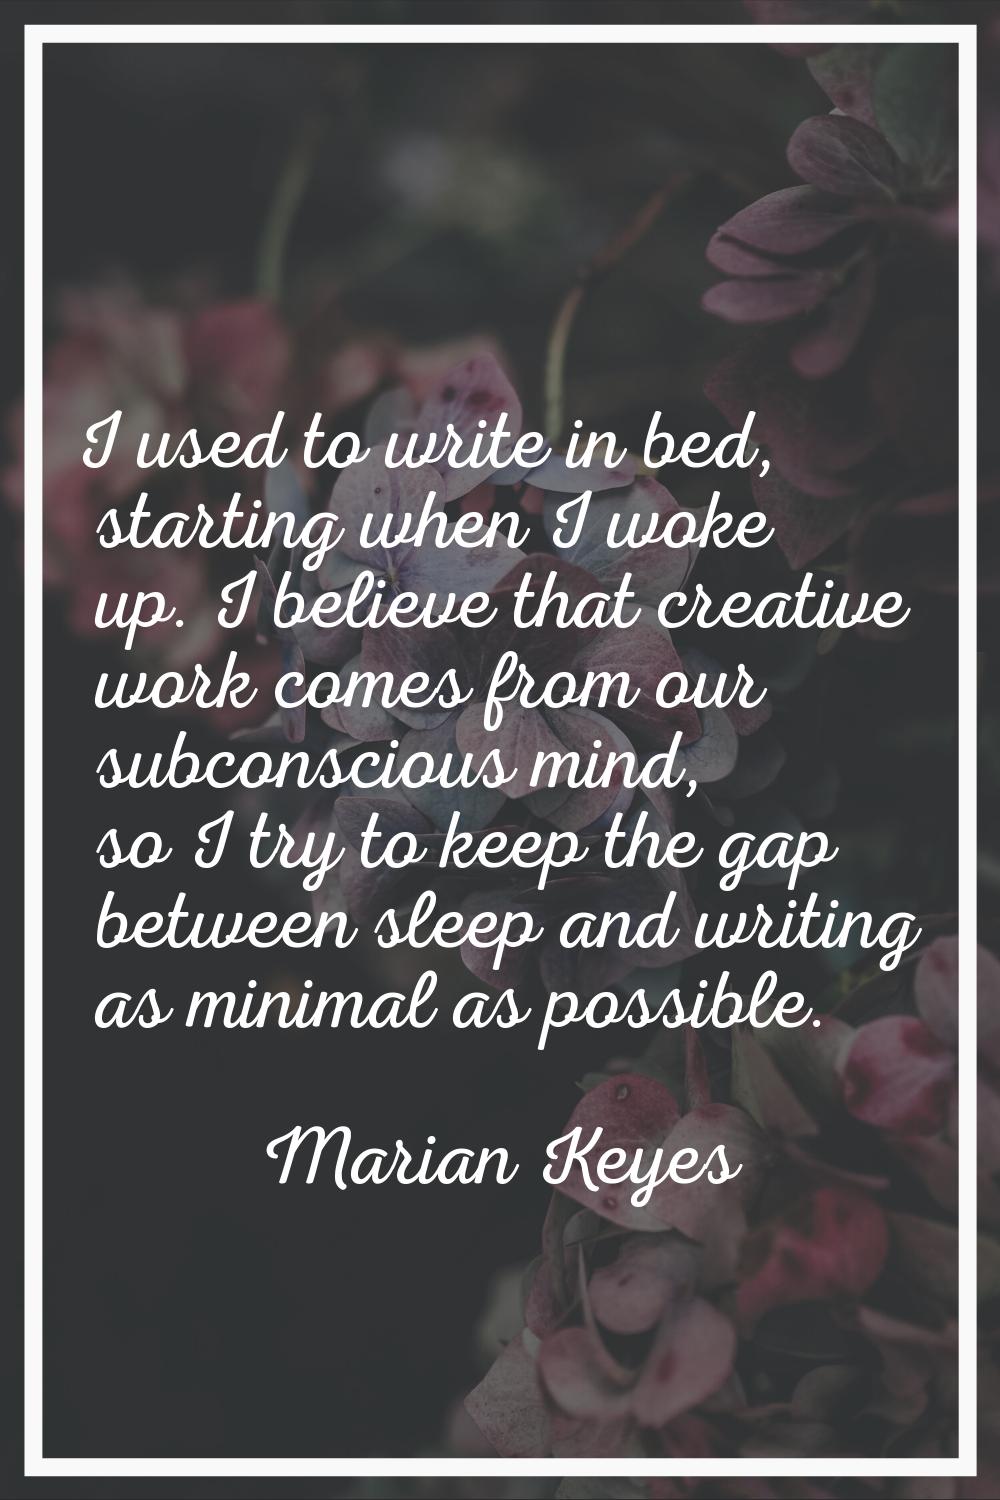 I used to write in bed, starting when I woke up. I believe that creative work comes from our subcon